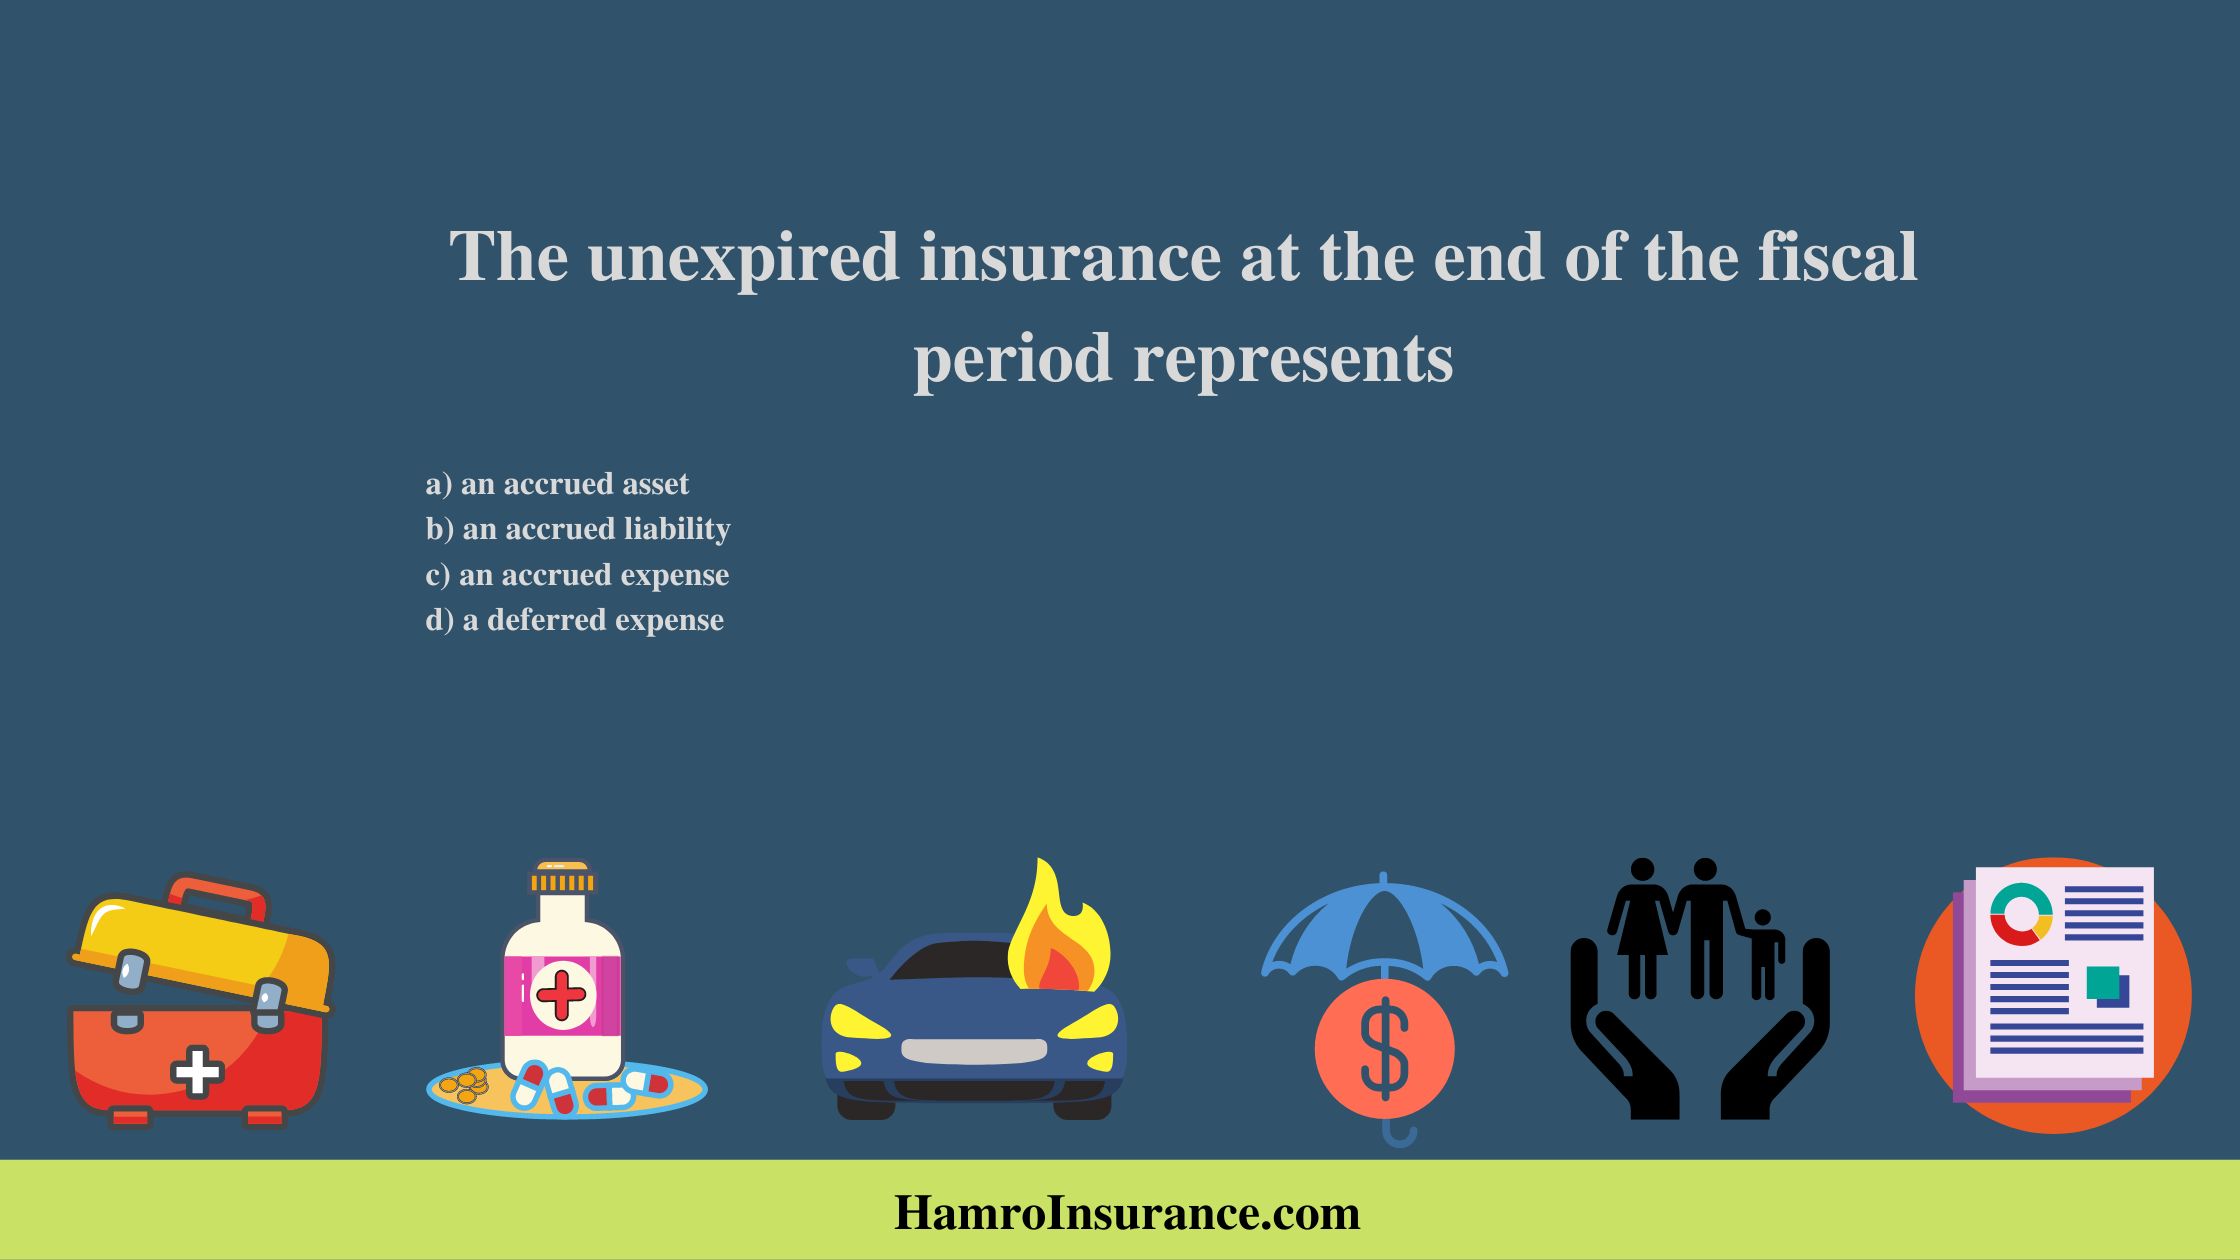 The unexpired insurance at the end of the fiscal period represents